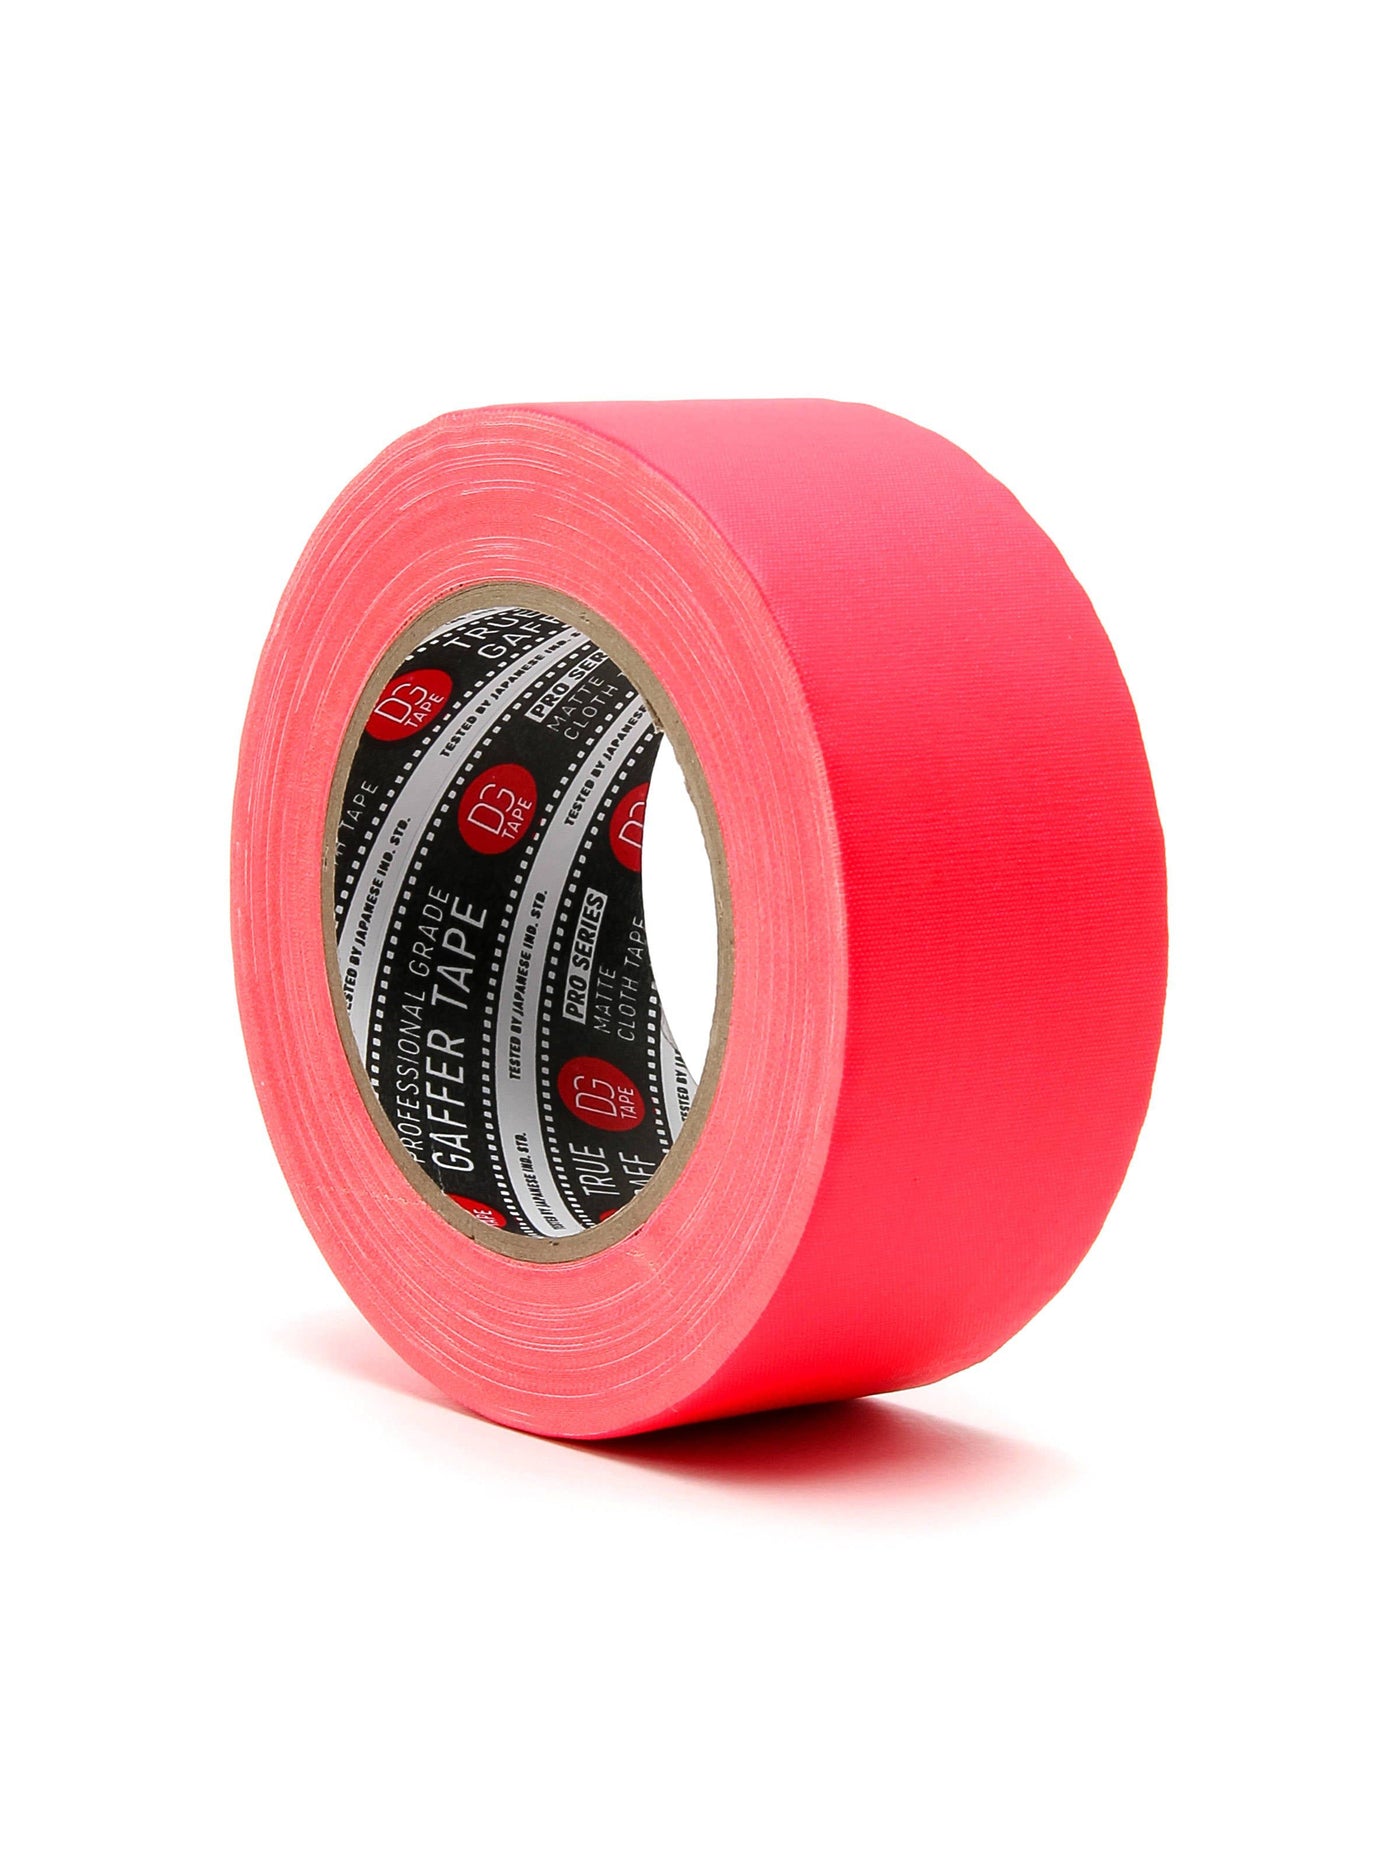 Pro Gaff Gaffers Tape 1 and 2 inch widths, 17 colors available, 1 inch,  Olive Drab 